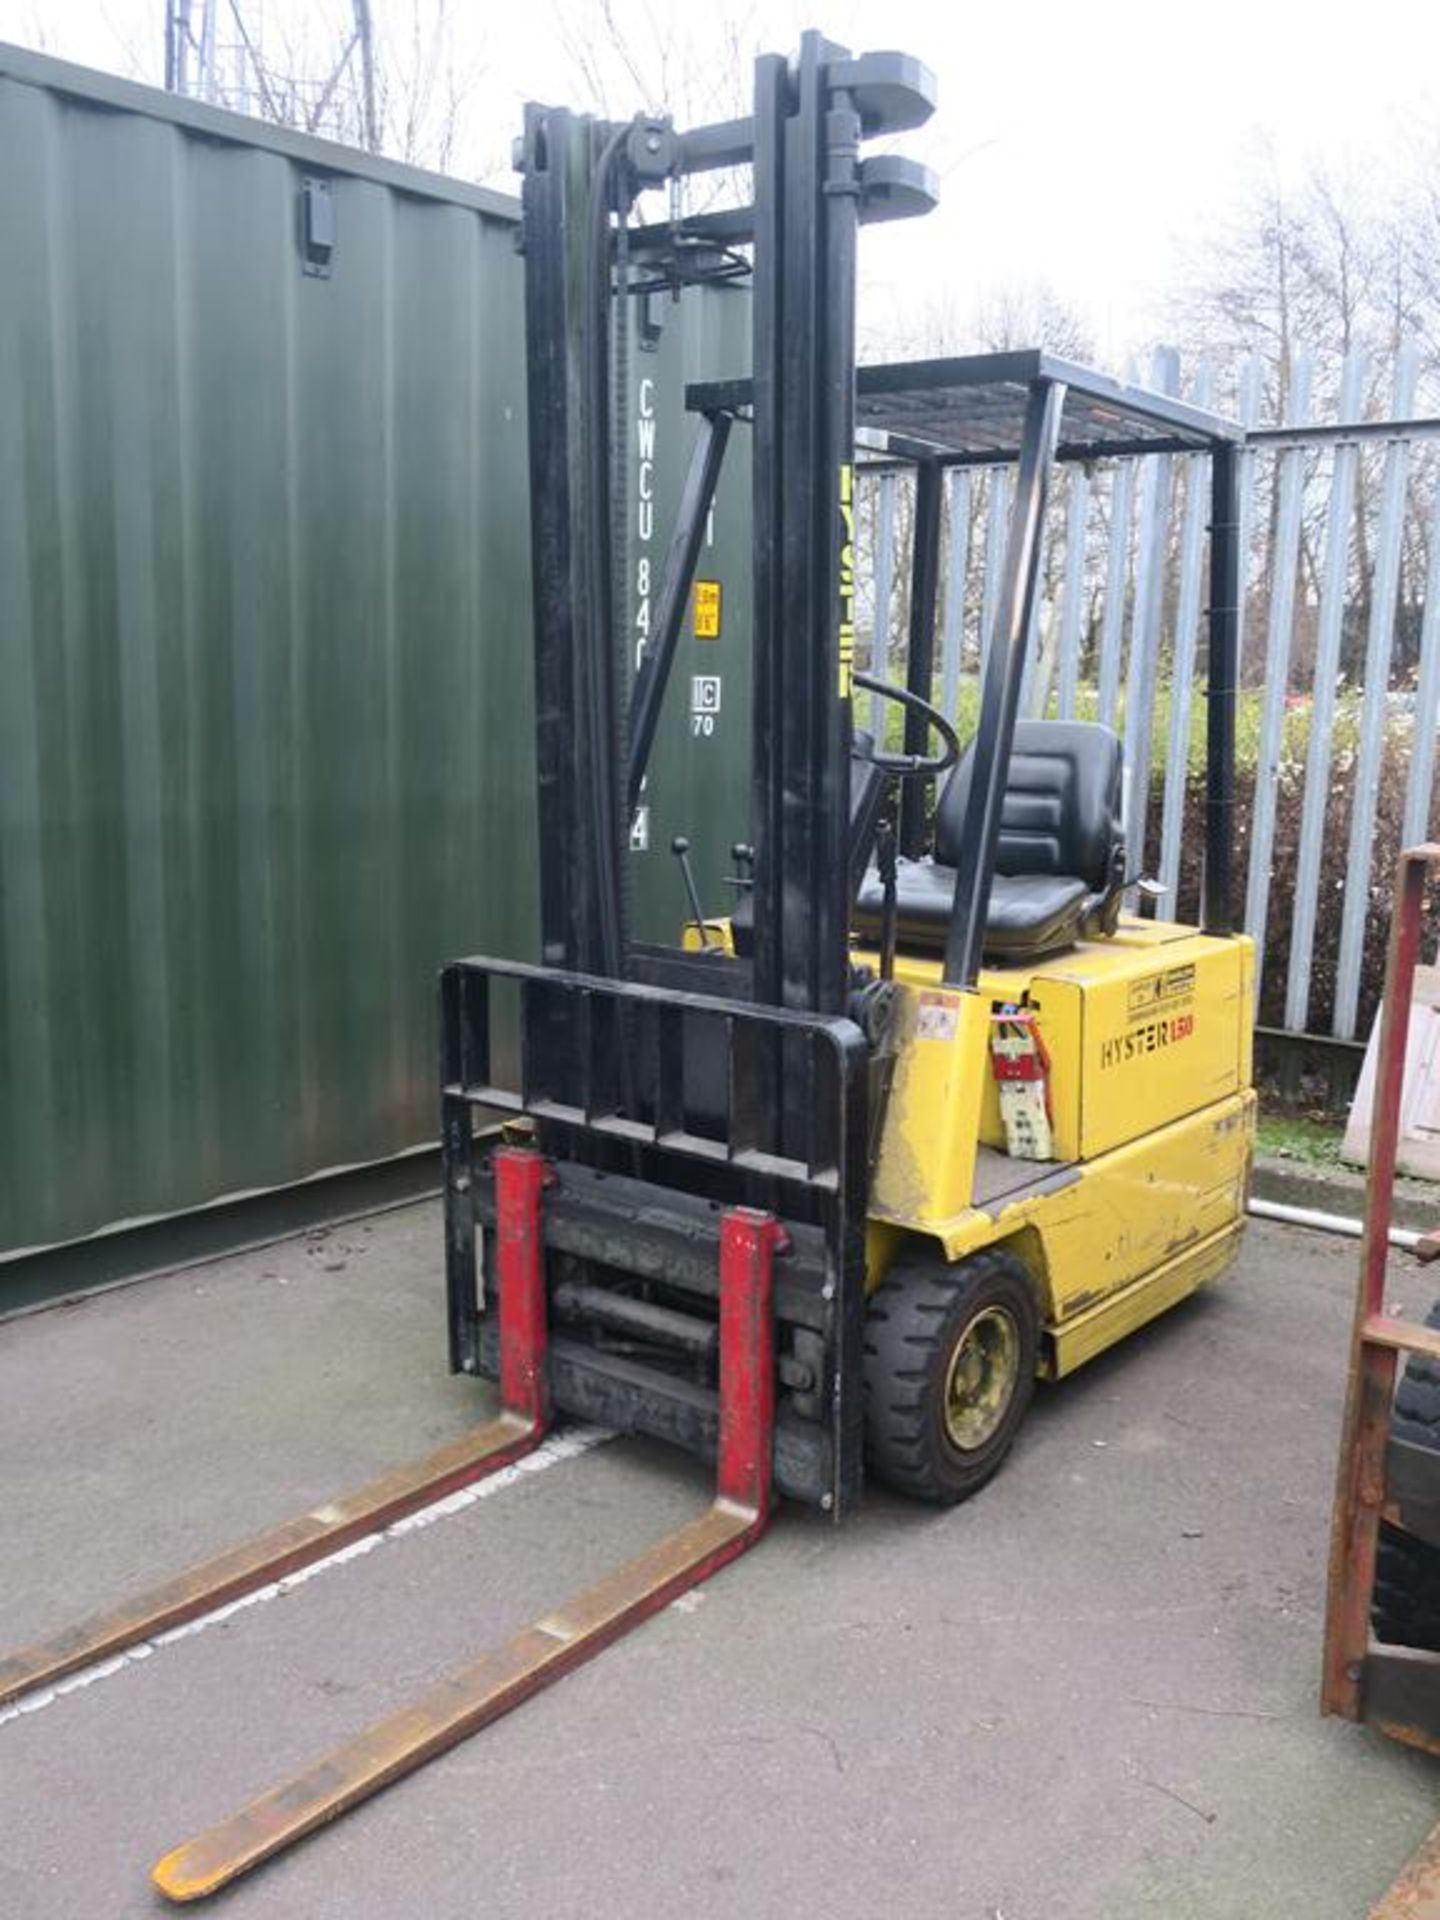 * Hyster 1.50 Electric Fork Lift comes with duplex mast, side shift and charger (RD Power - Image 8 of 10